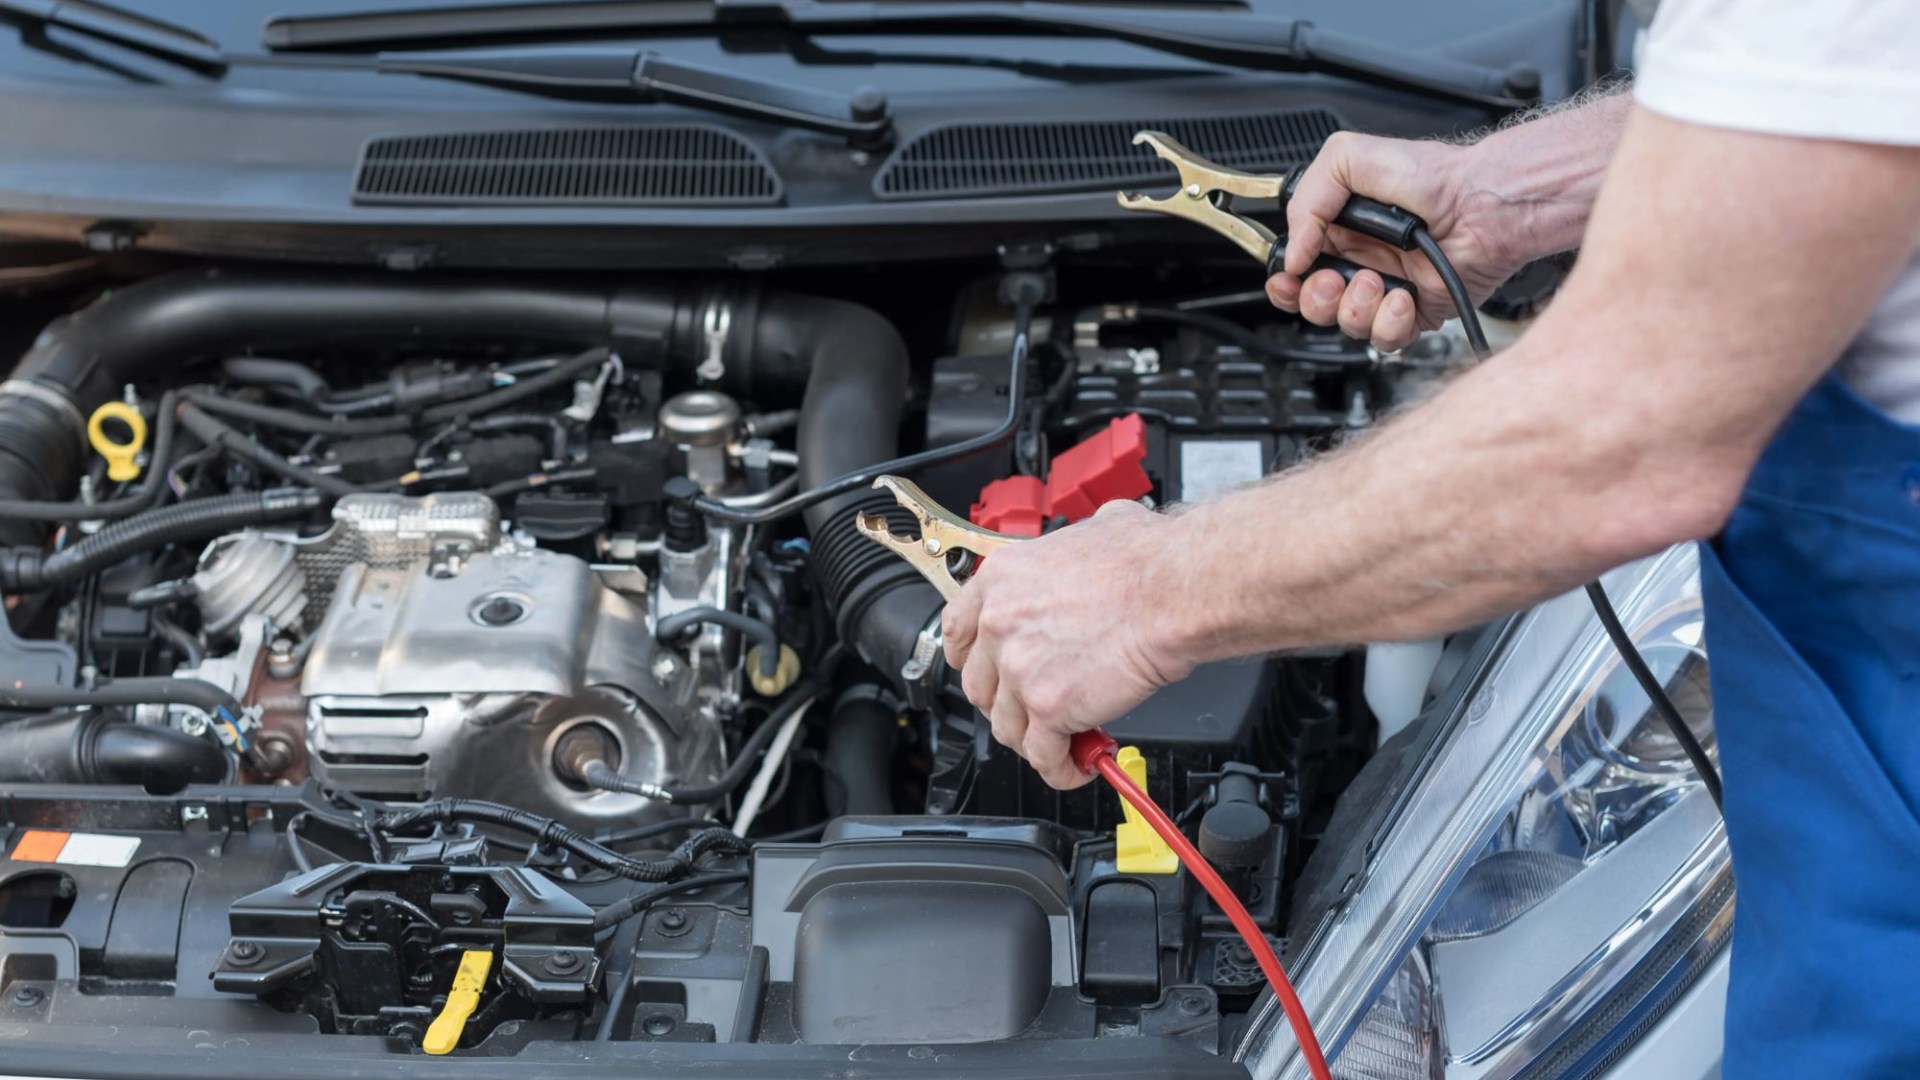 How to jump start your car  a simple step-by-step guide [Video]